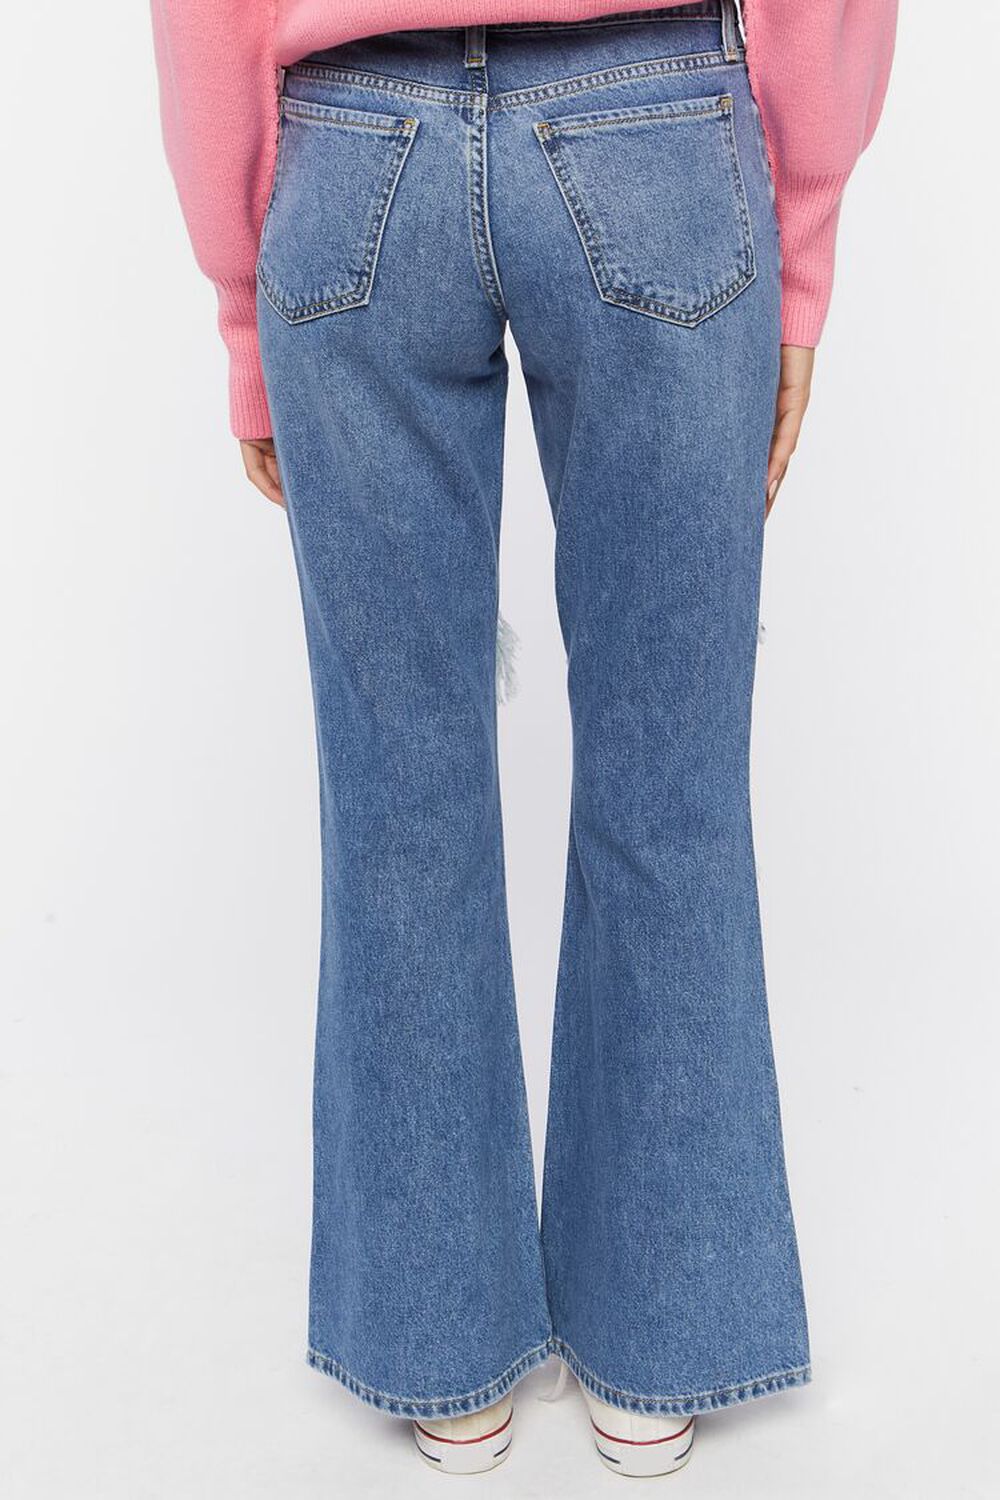 Distressed Flare Jeans, image 3